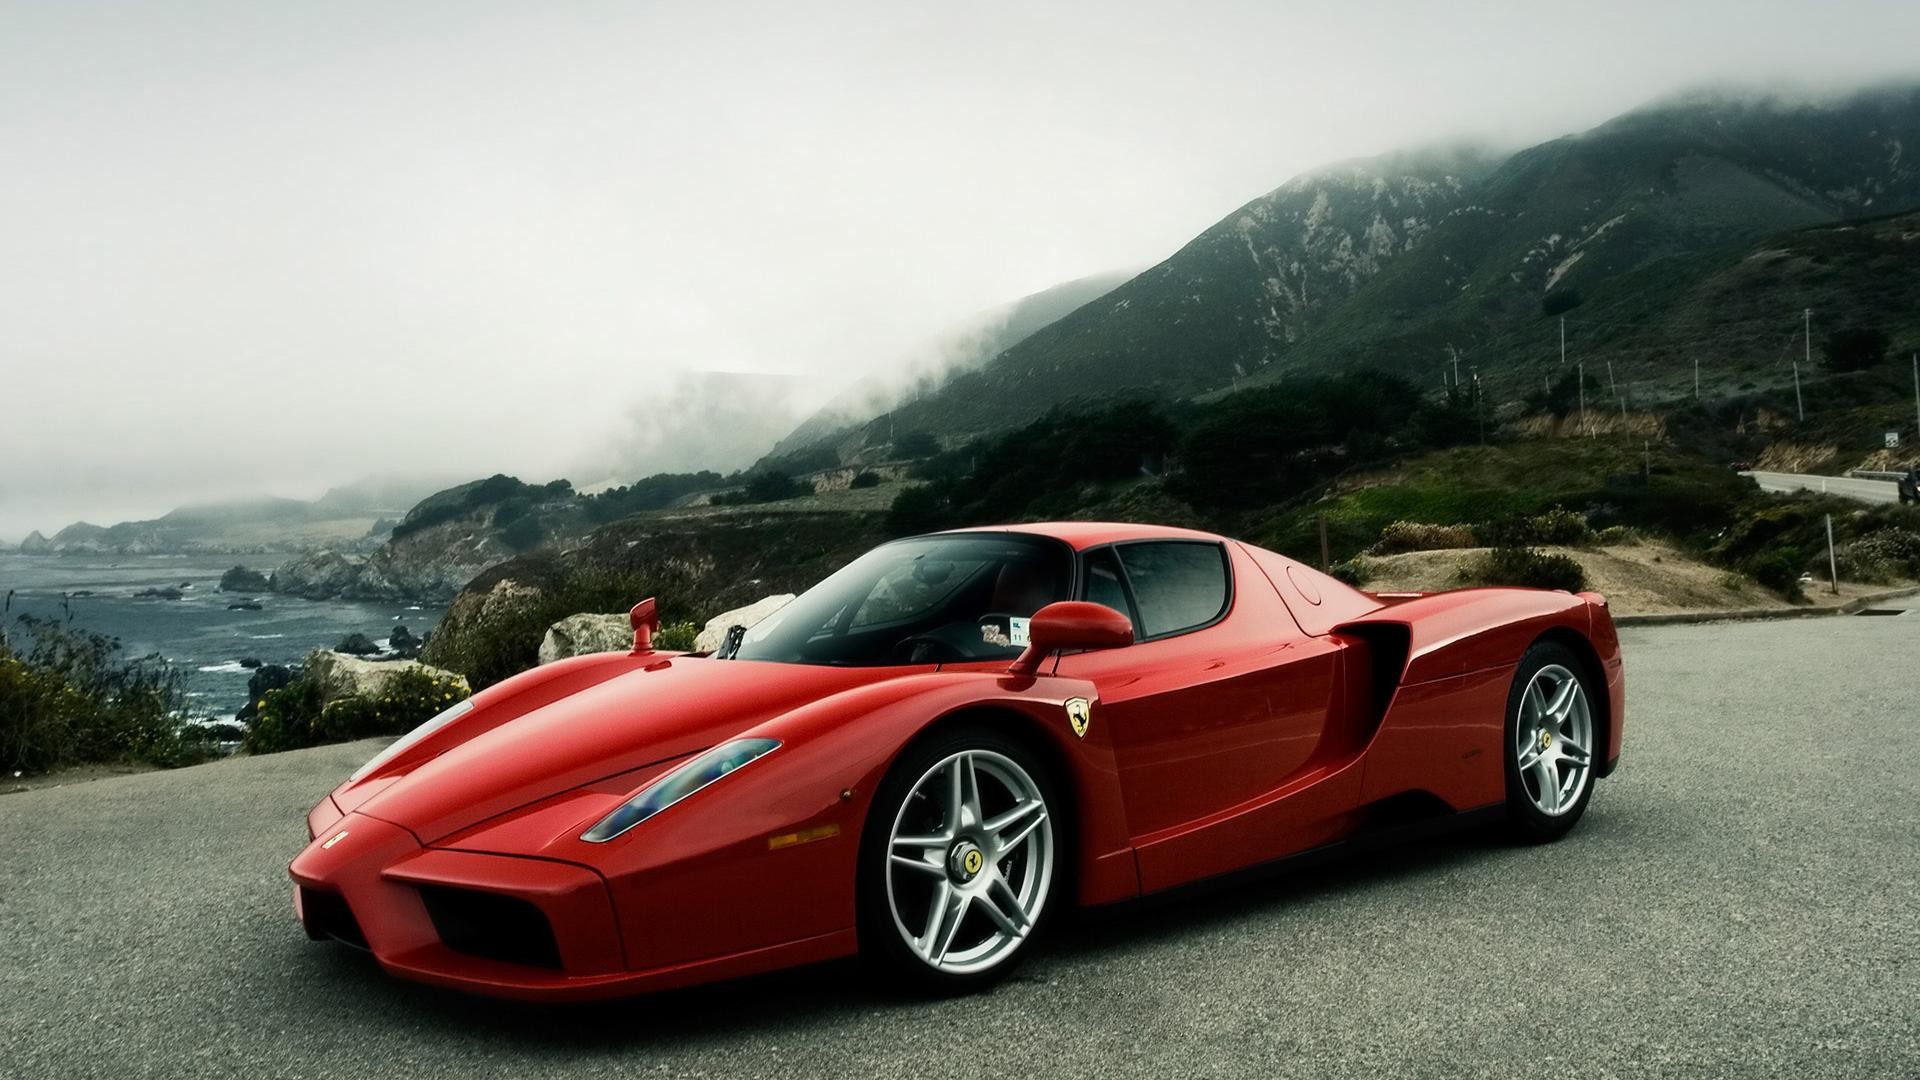 1920x1080 HD Wallpapers For Cars Wallpaper Zone ...